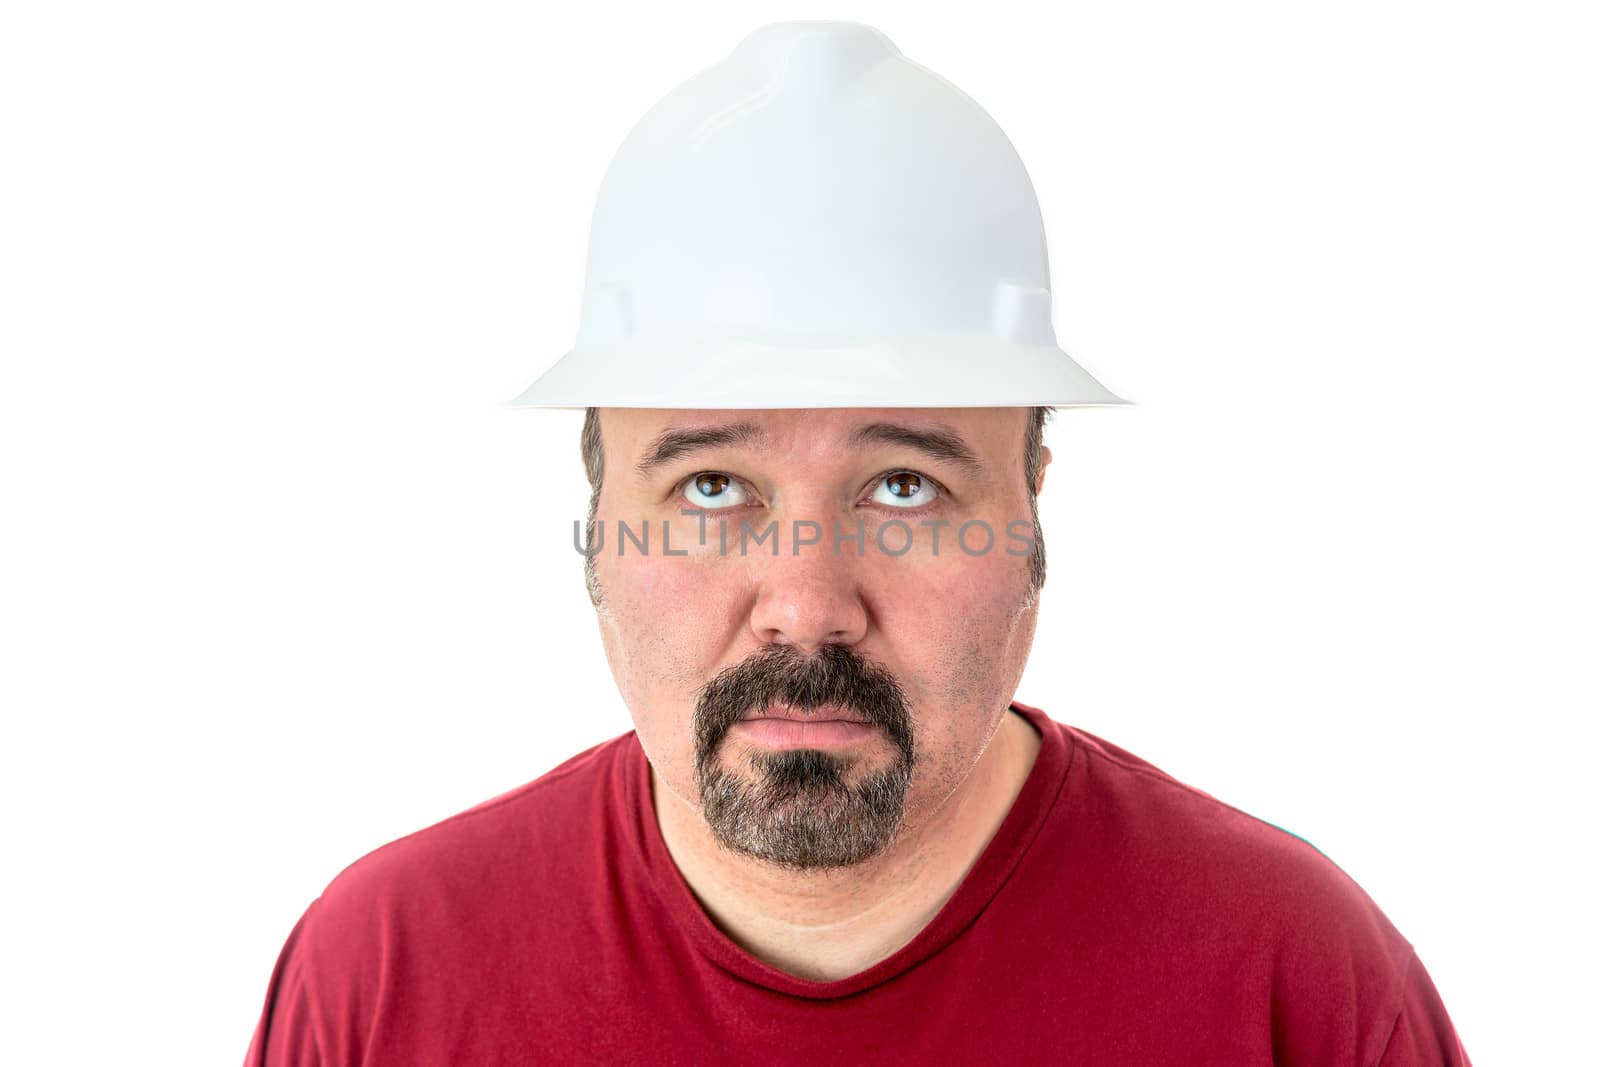 Glum looking workman wearing a hardhat looking for inspiration raising his eyes to the heavens in supplication, isolated on white